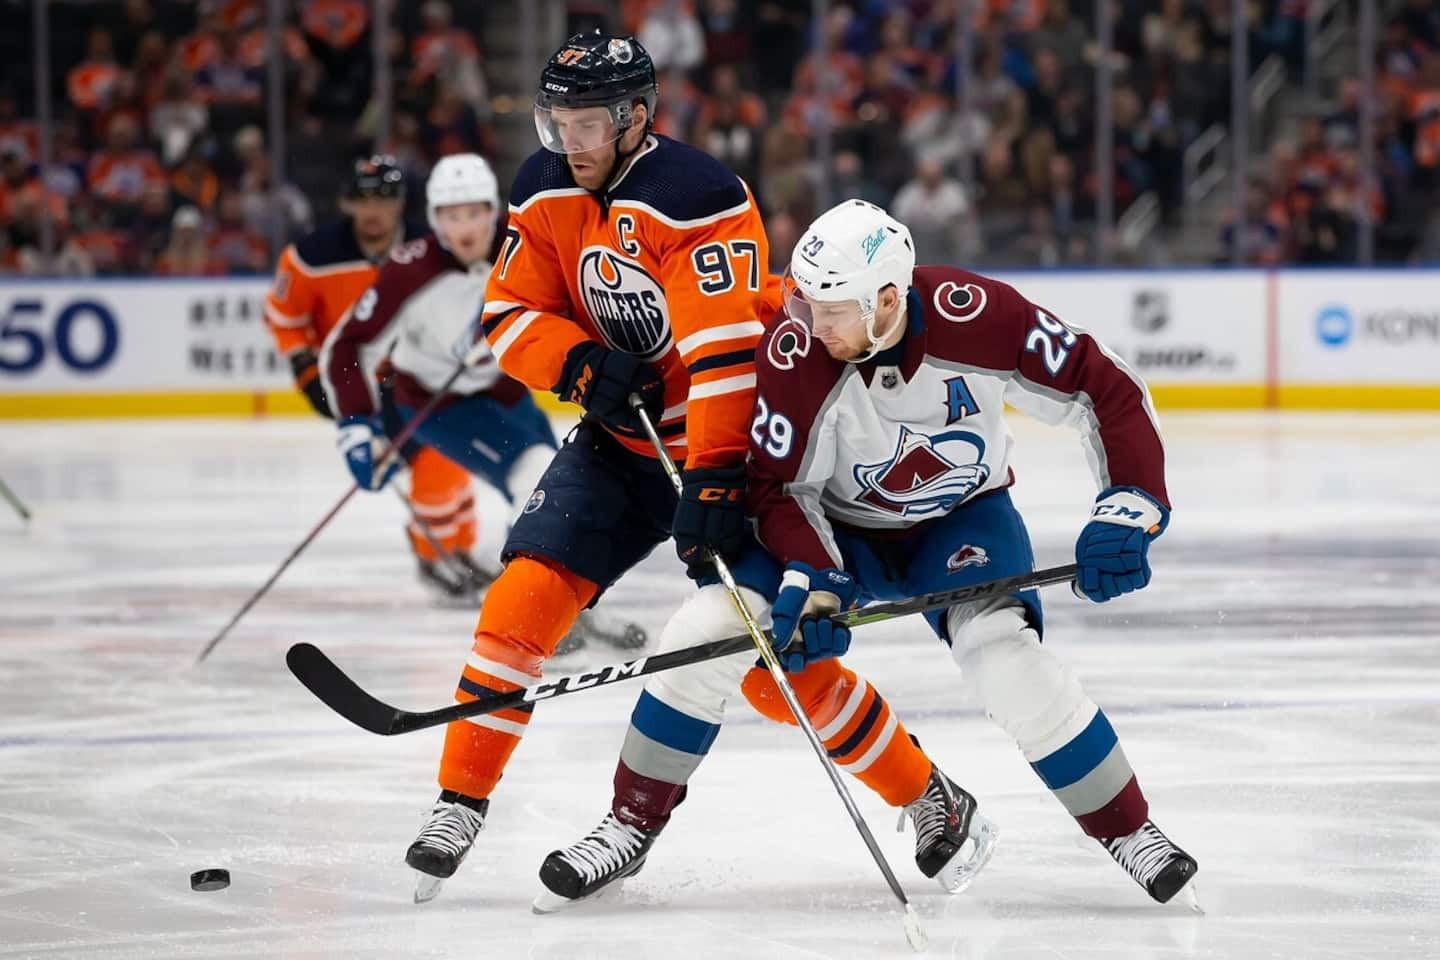 The Oilers will be watching MacKinnon closely